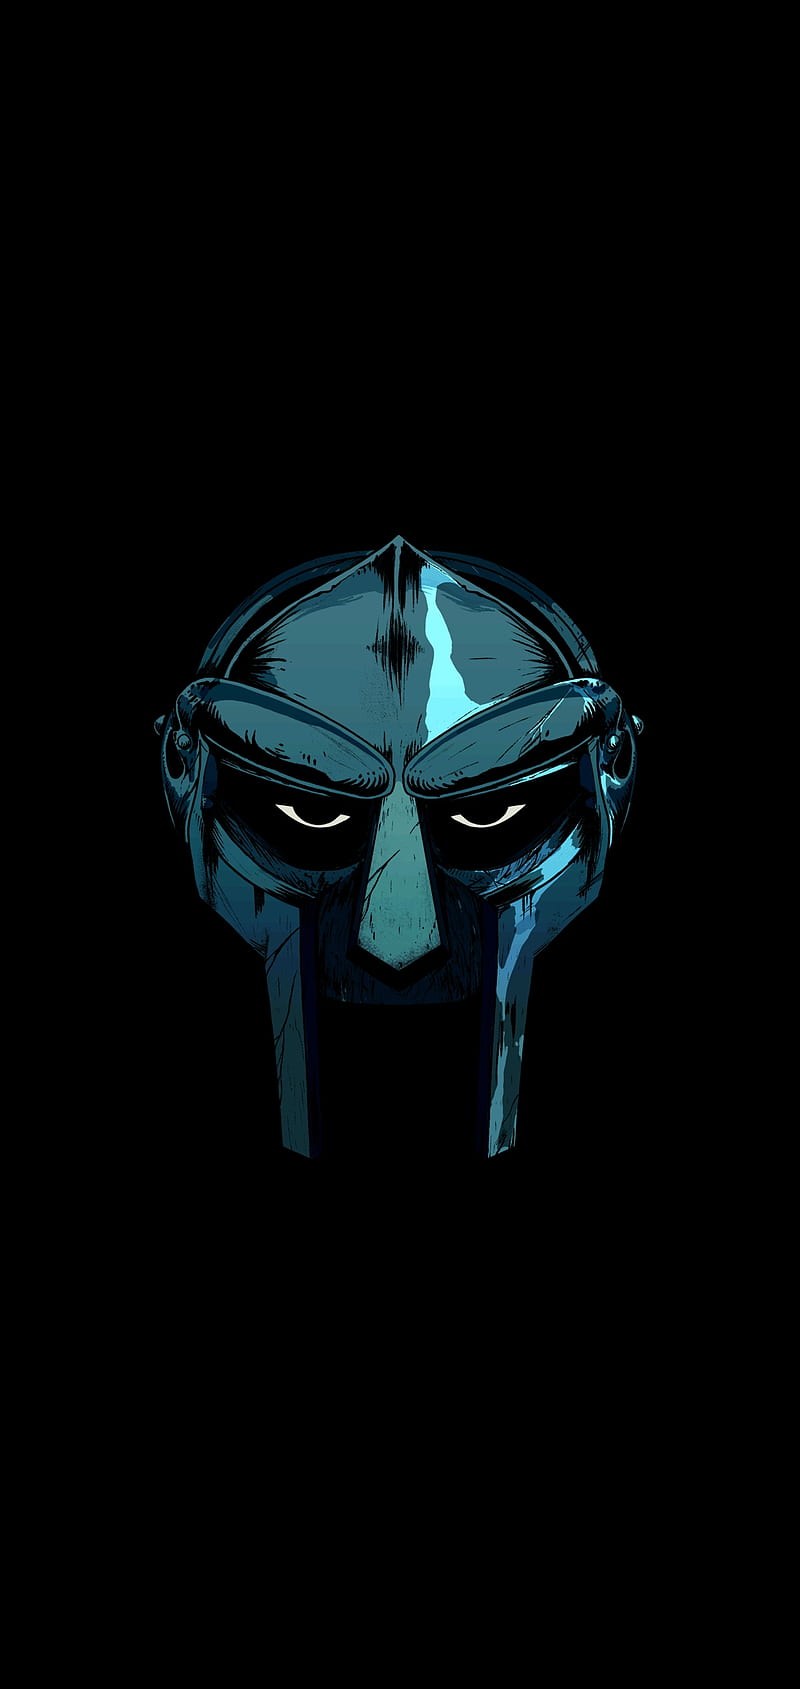 Enwallpaper  Mf Doom Wallpaper HD Download httpswwwenwallpapercommf doomwallpaperhd6 Mf Doom Wallpaper HD Free Full HD Download use for  mobile and desktop Discover more American Rapper Intricate Wordplay  Mask Mf Doom Record Producer